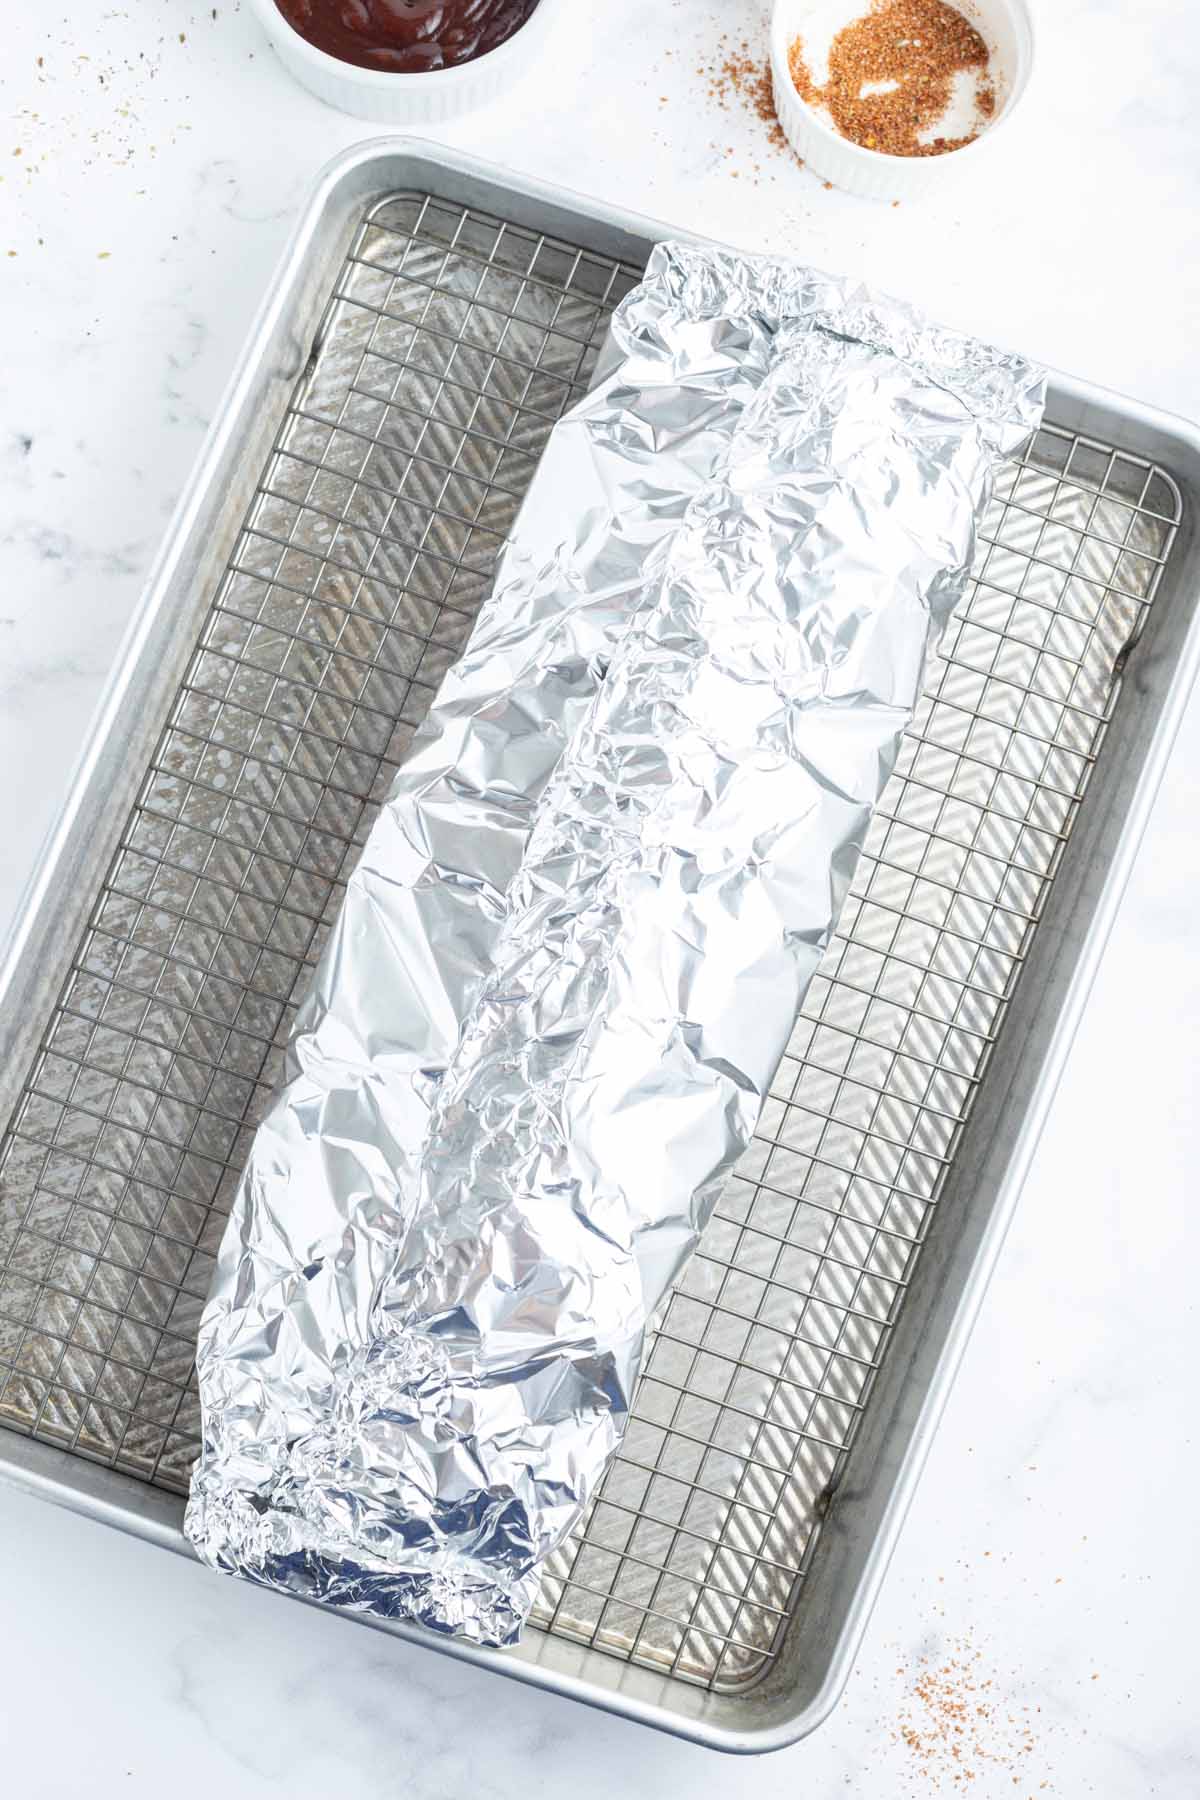 Ribs wrapped in aluminum foil.